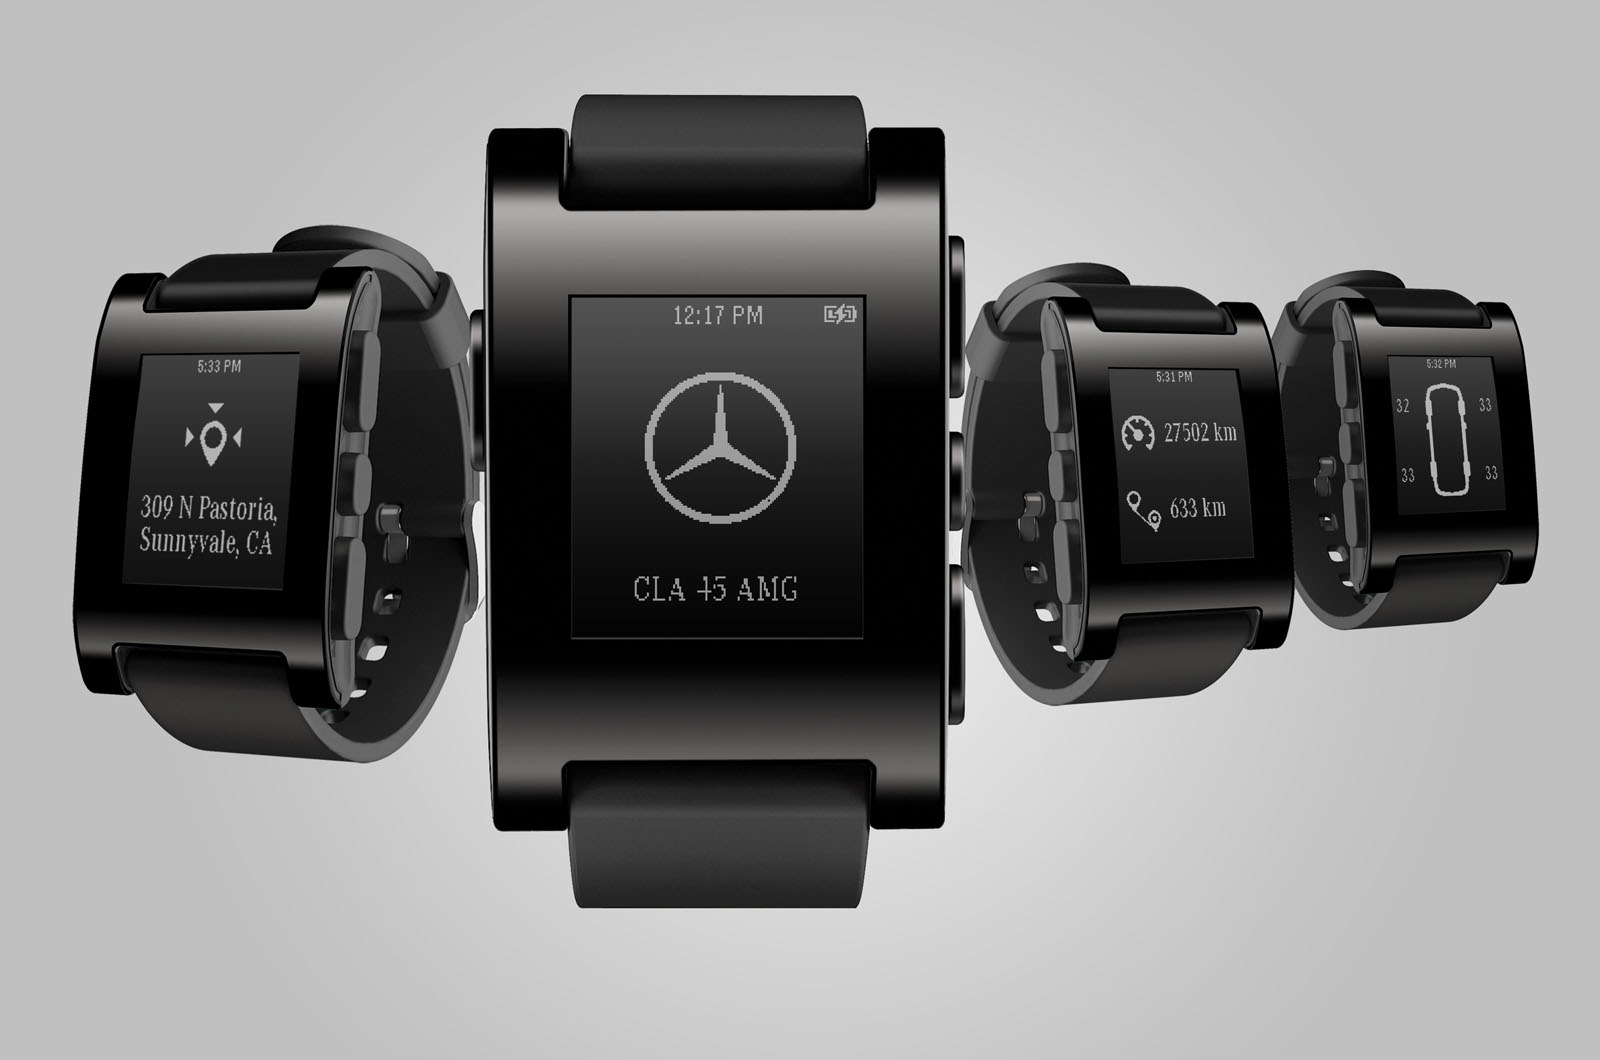 Mercedes reveals a smart watch that can talk to your car